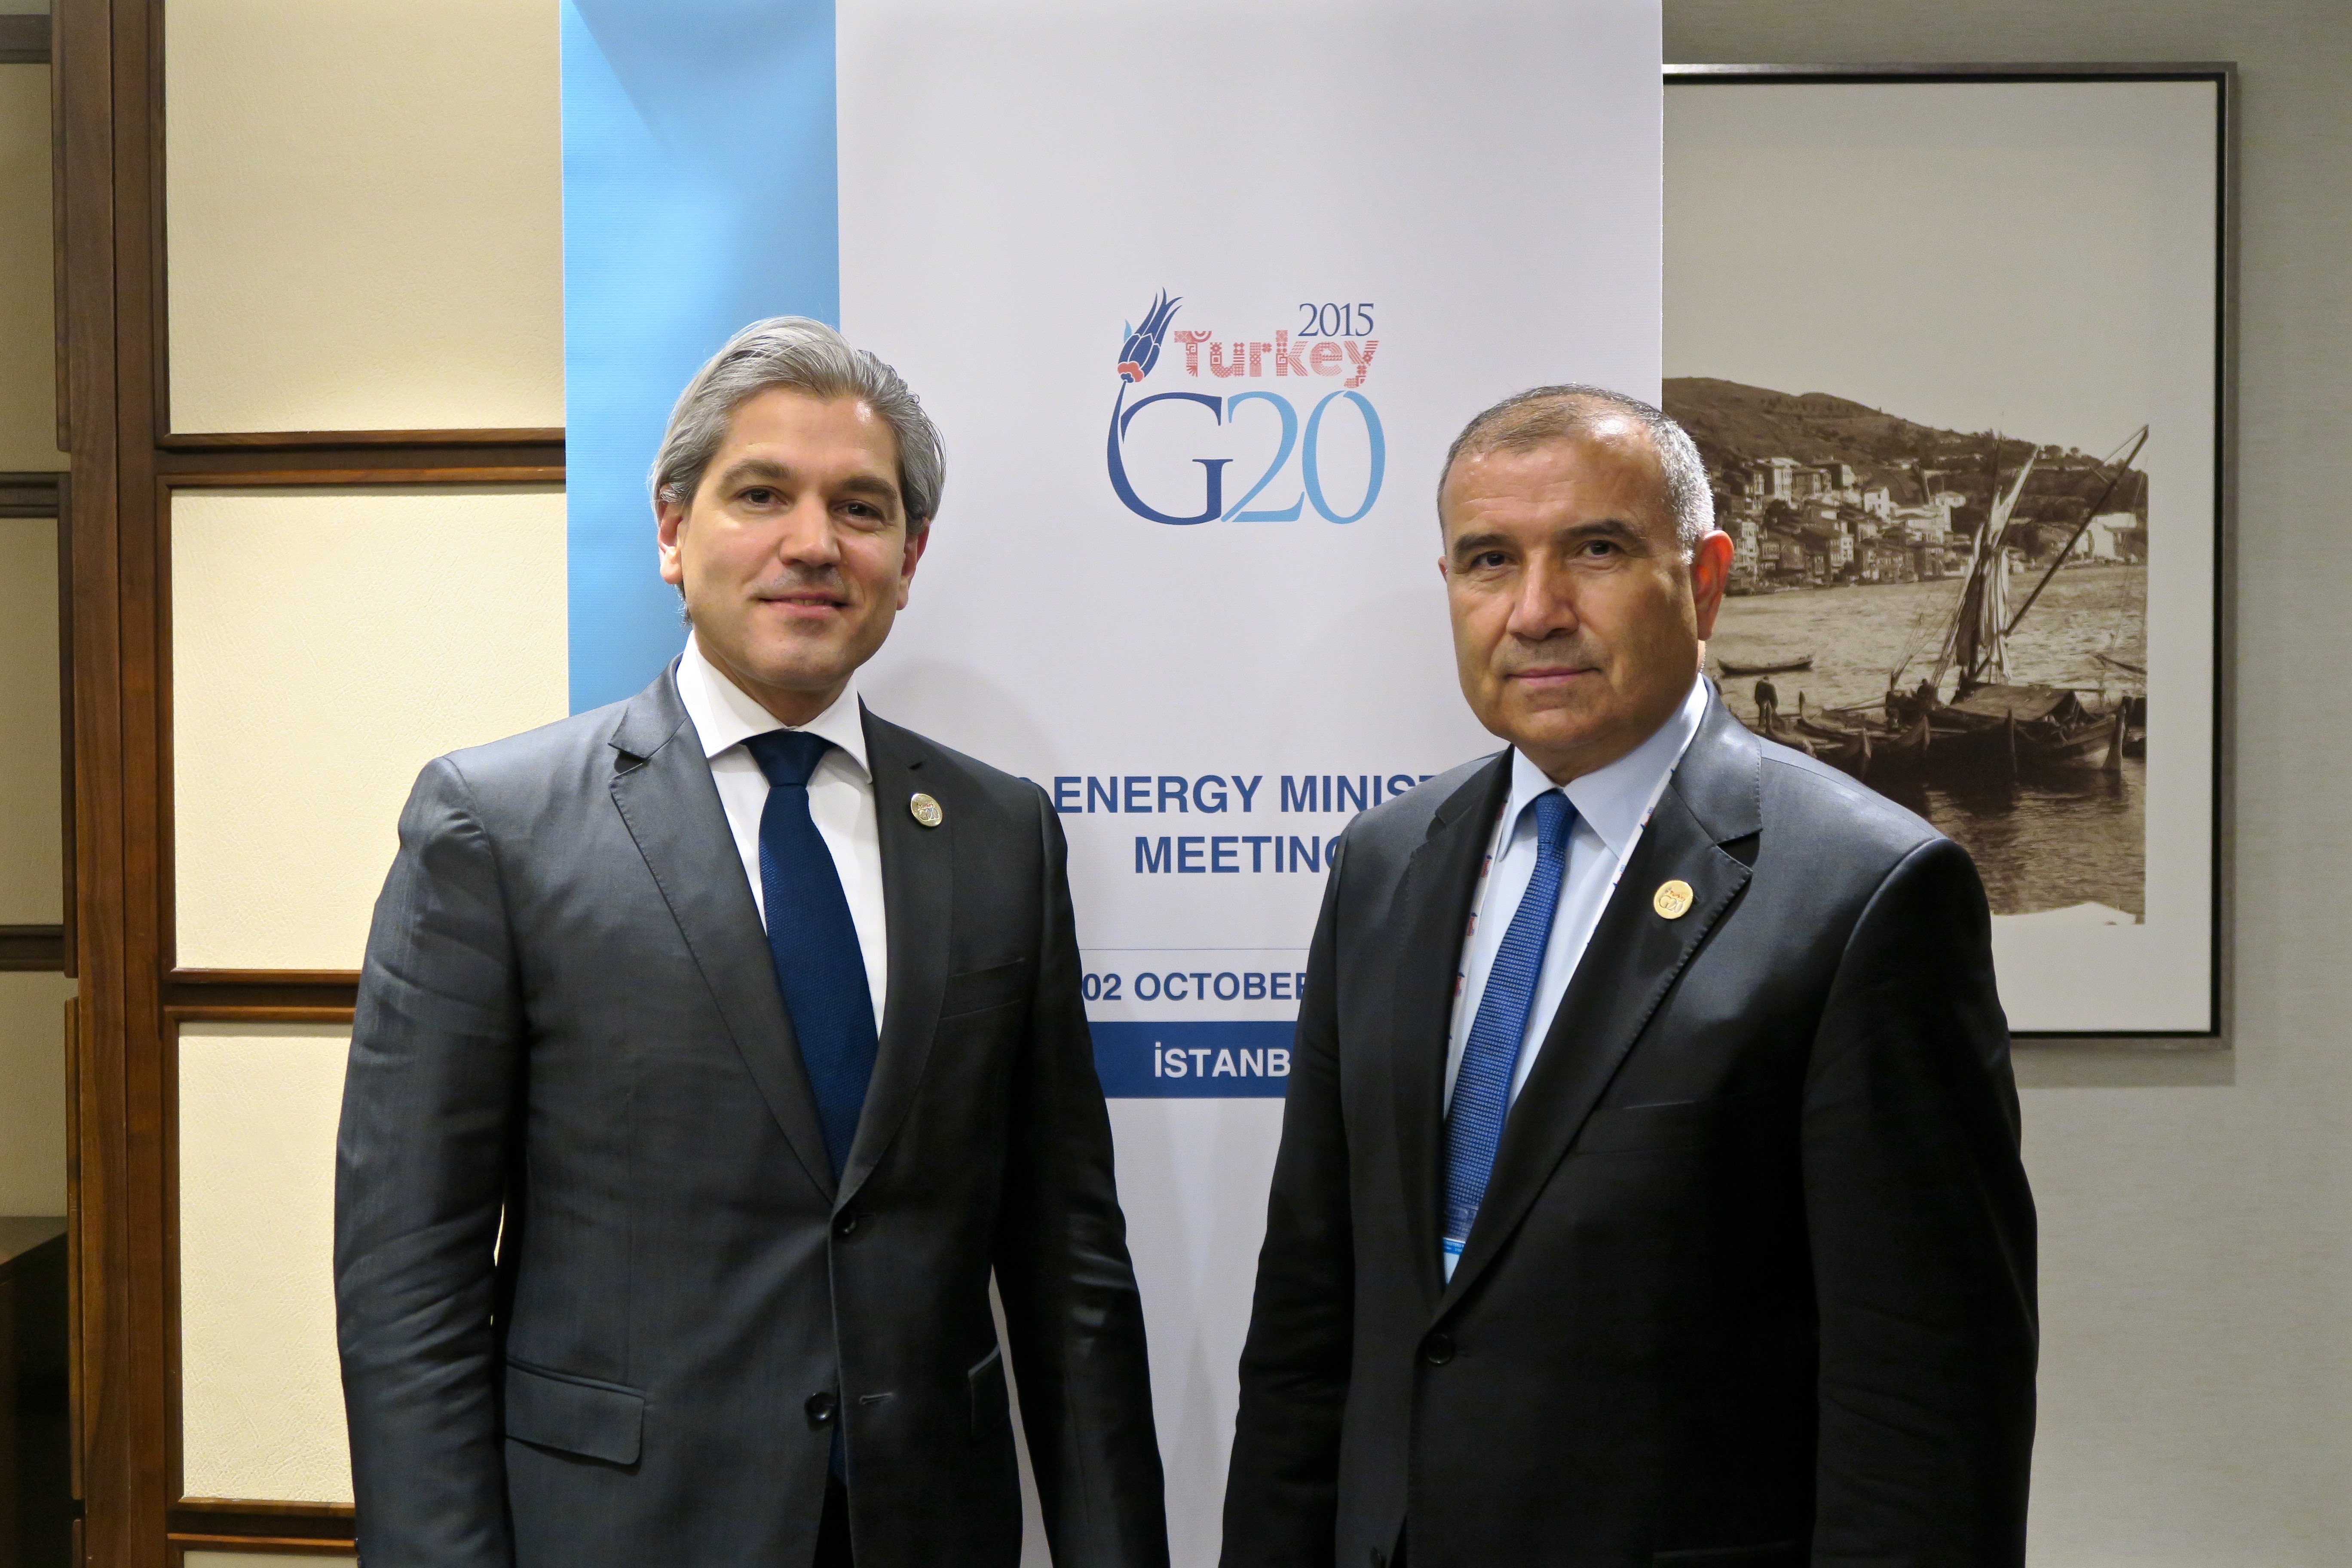 G20-energy-ministers-meeting-and-conference-on-energy-access-4